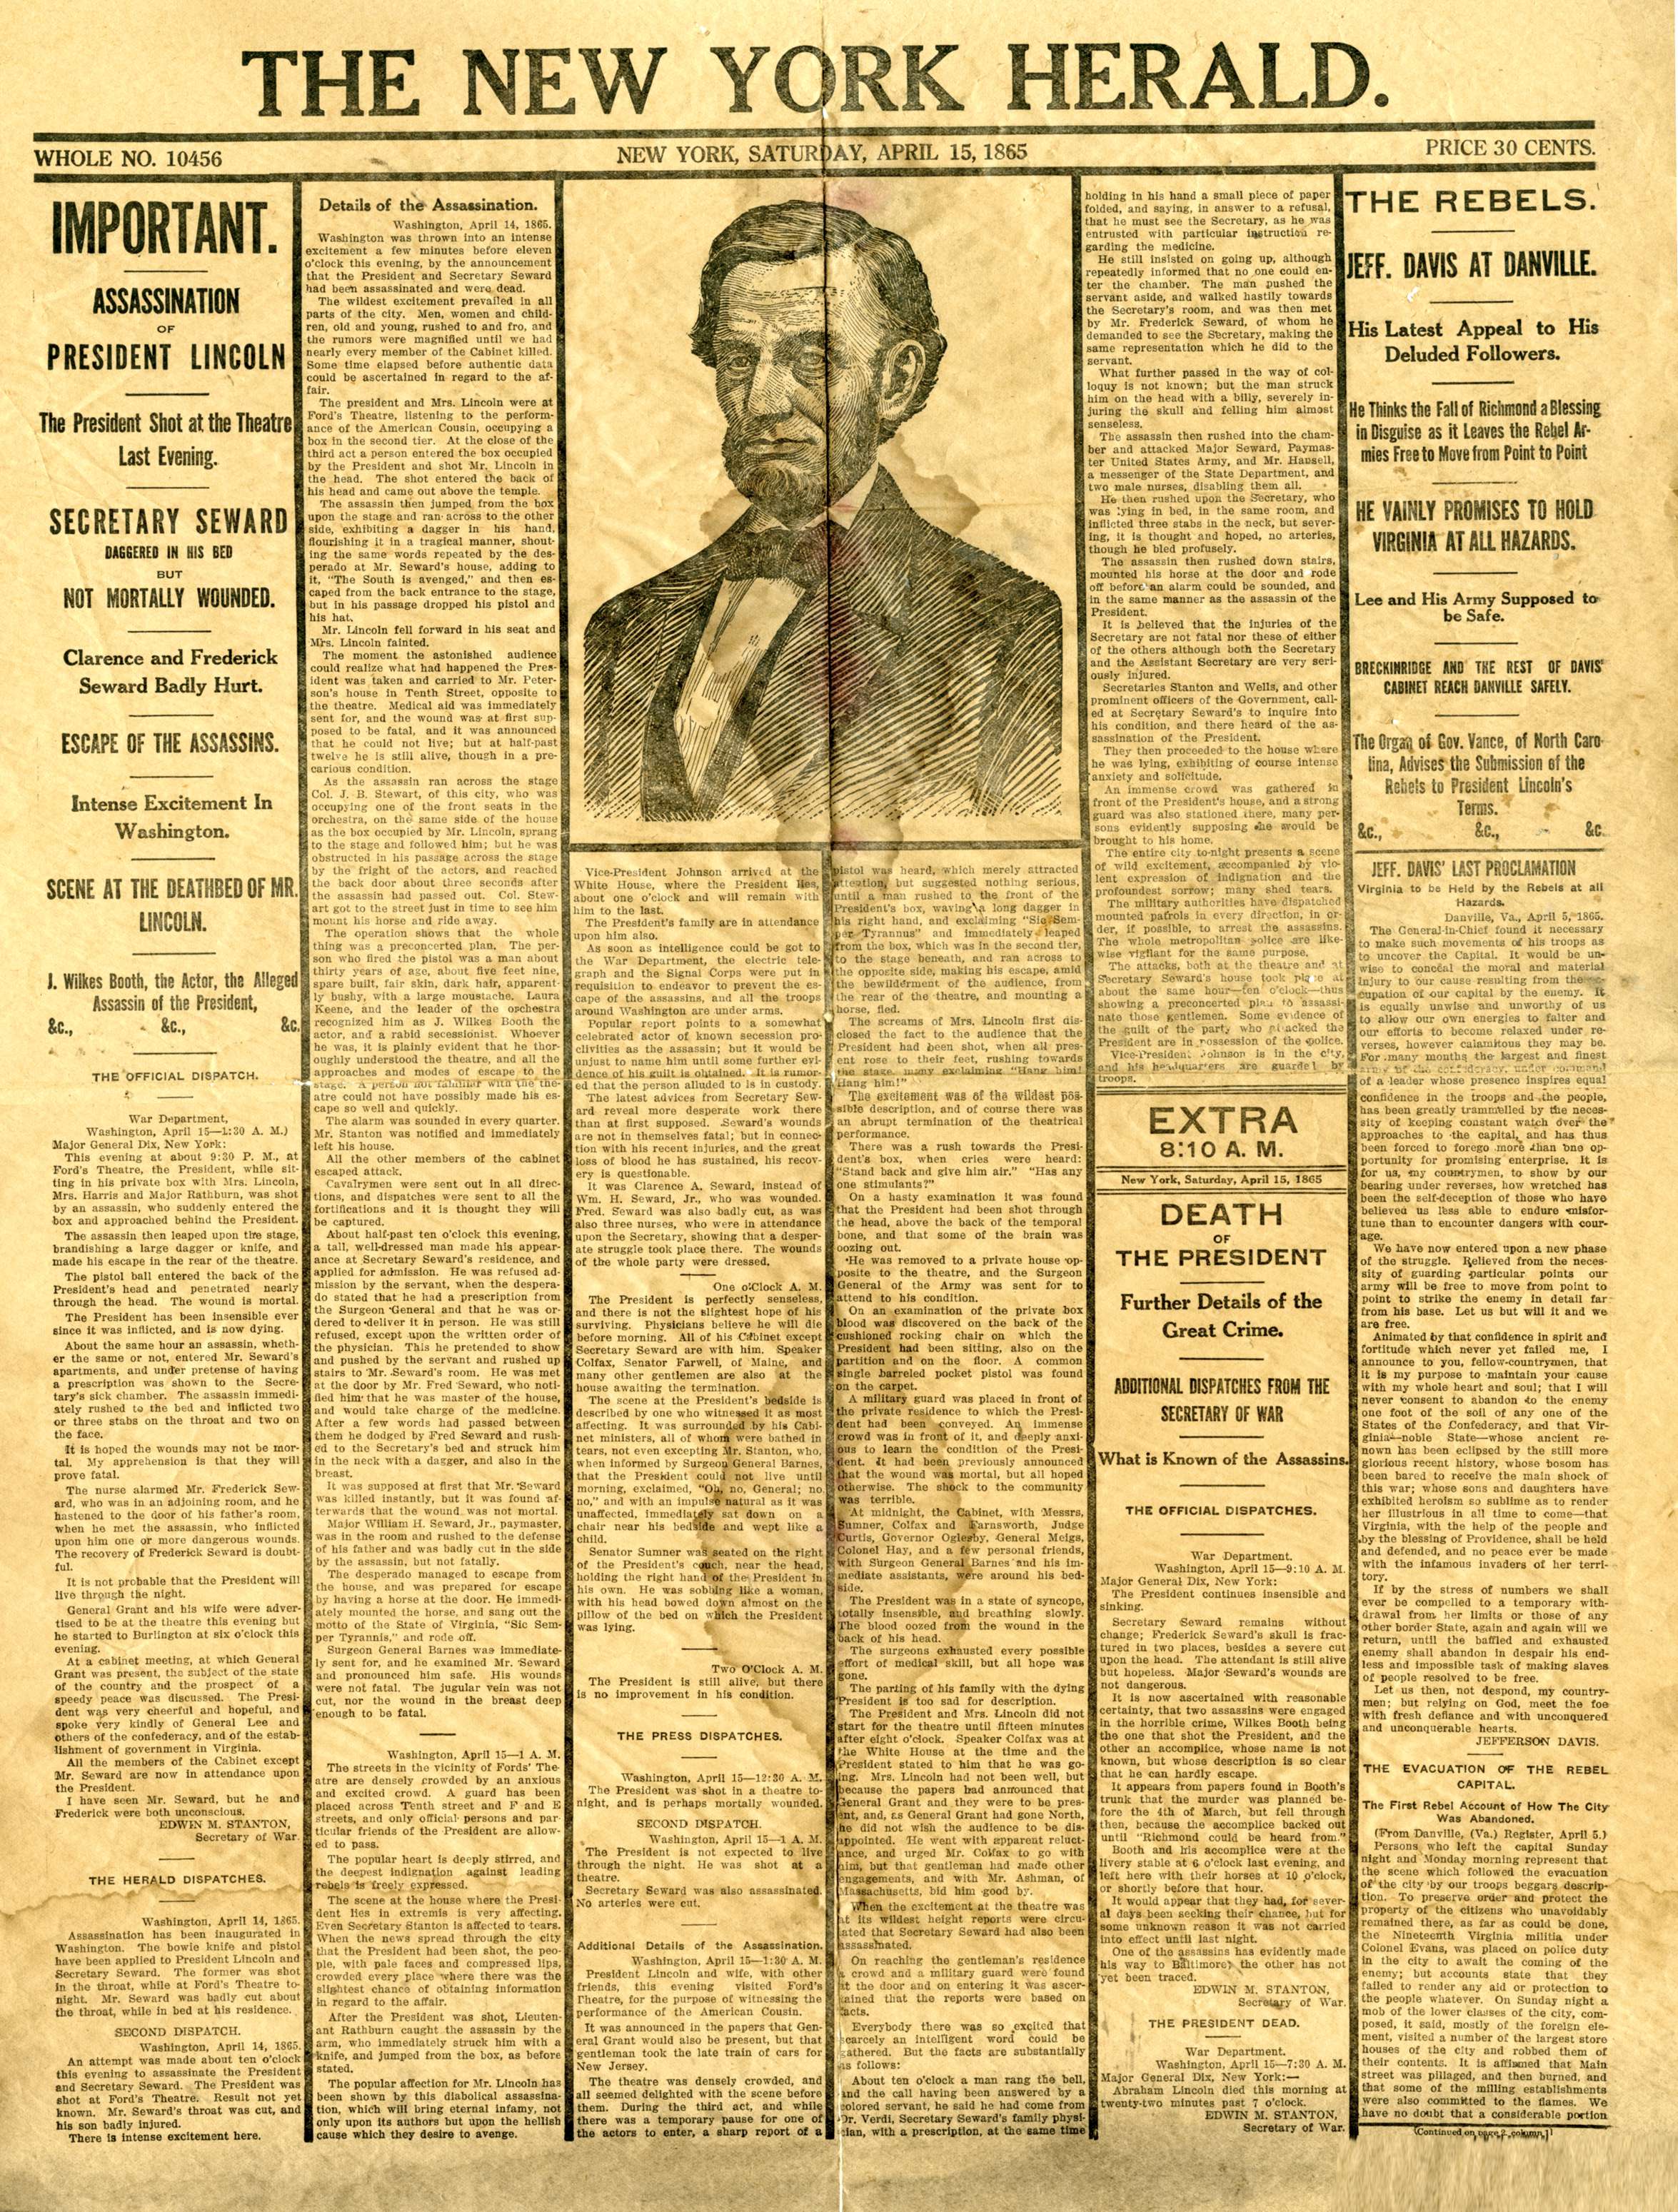 How did the world react to Lincoln's assassination?